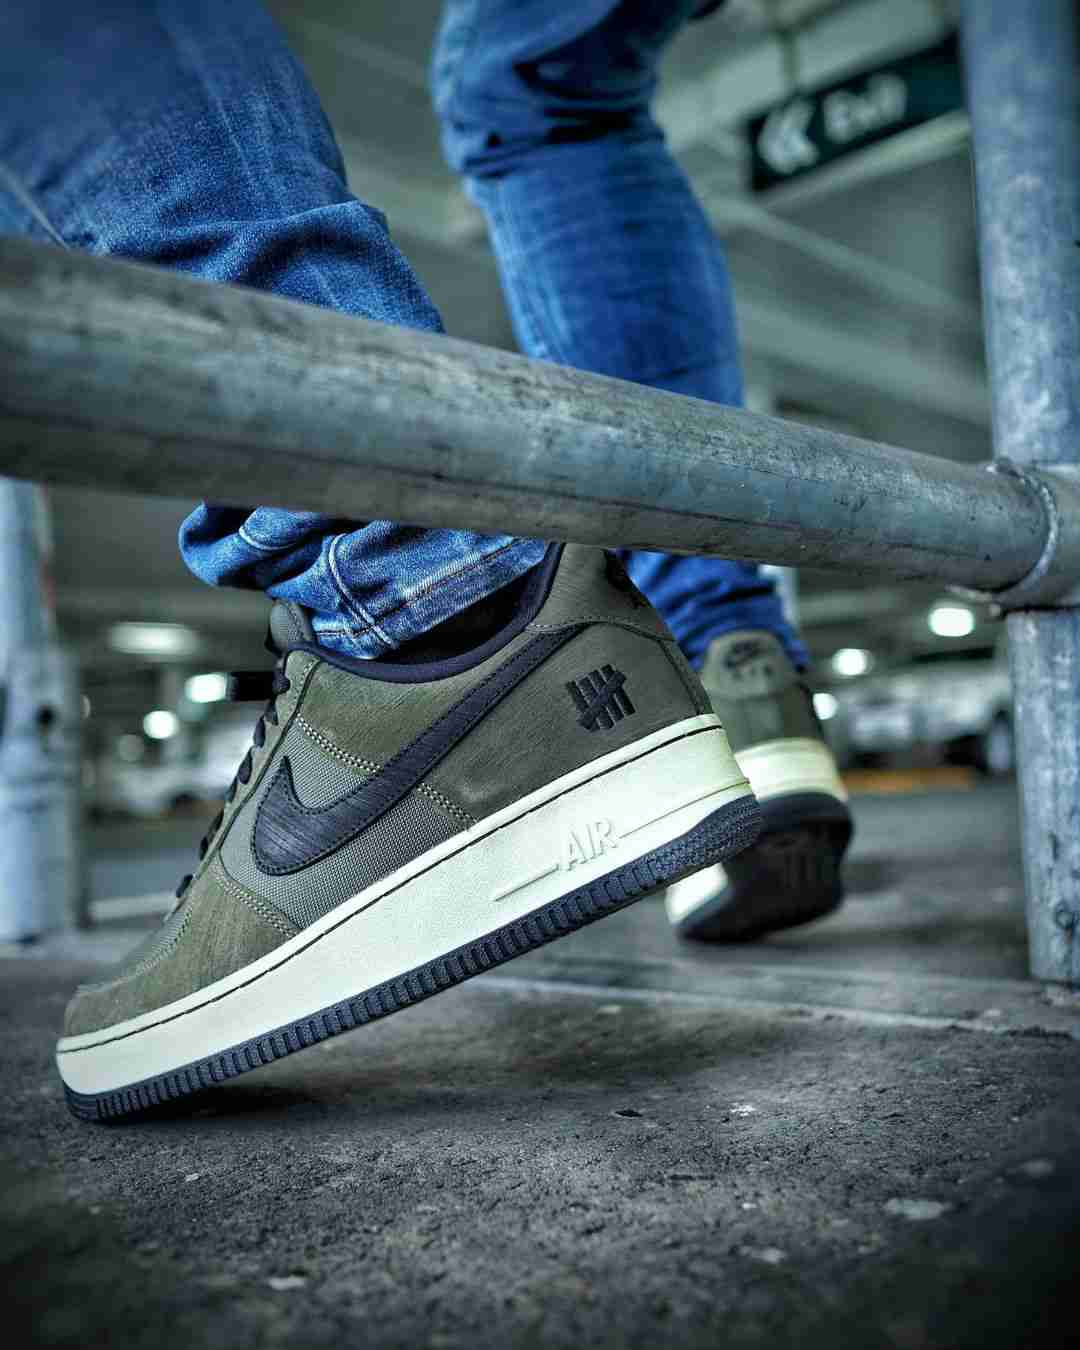 UNDEFEATED x Nike Air Force 1 Low SP 'Ballistic' - DH3064-300